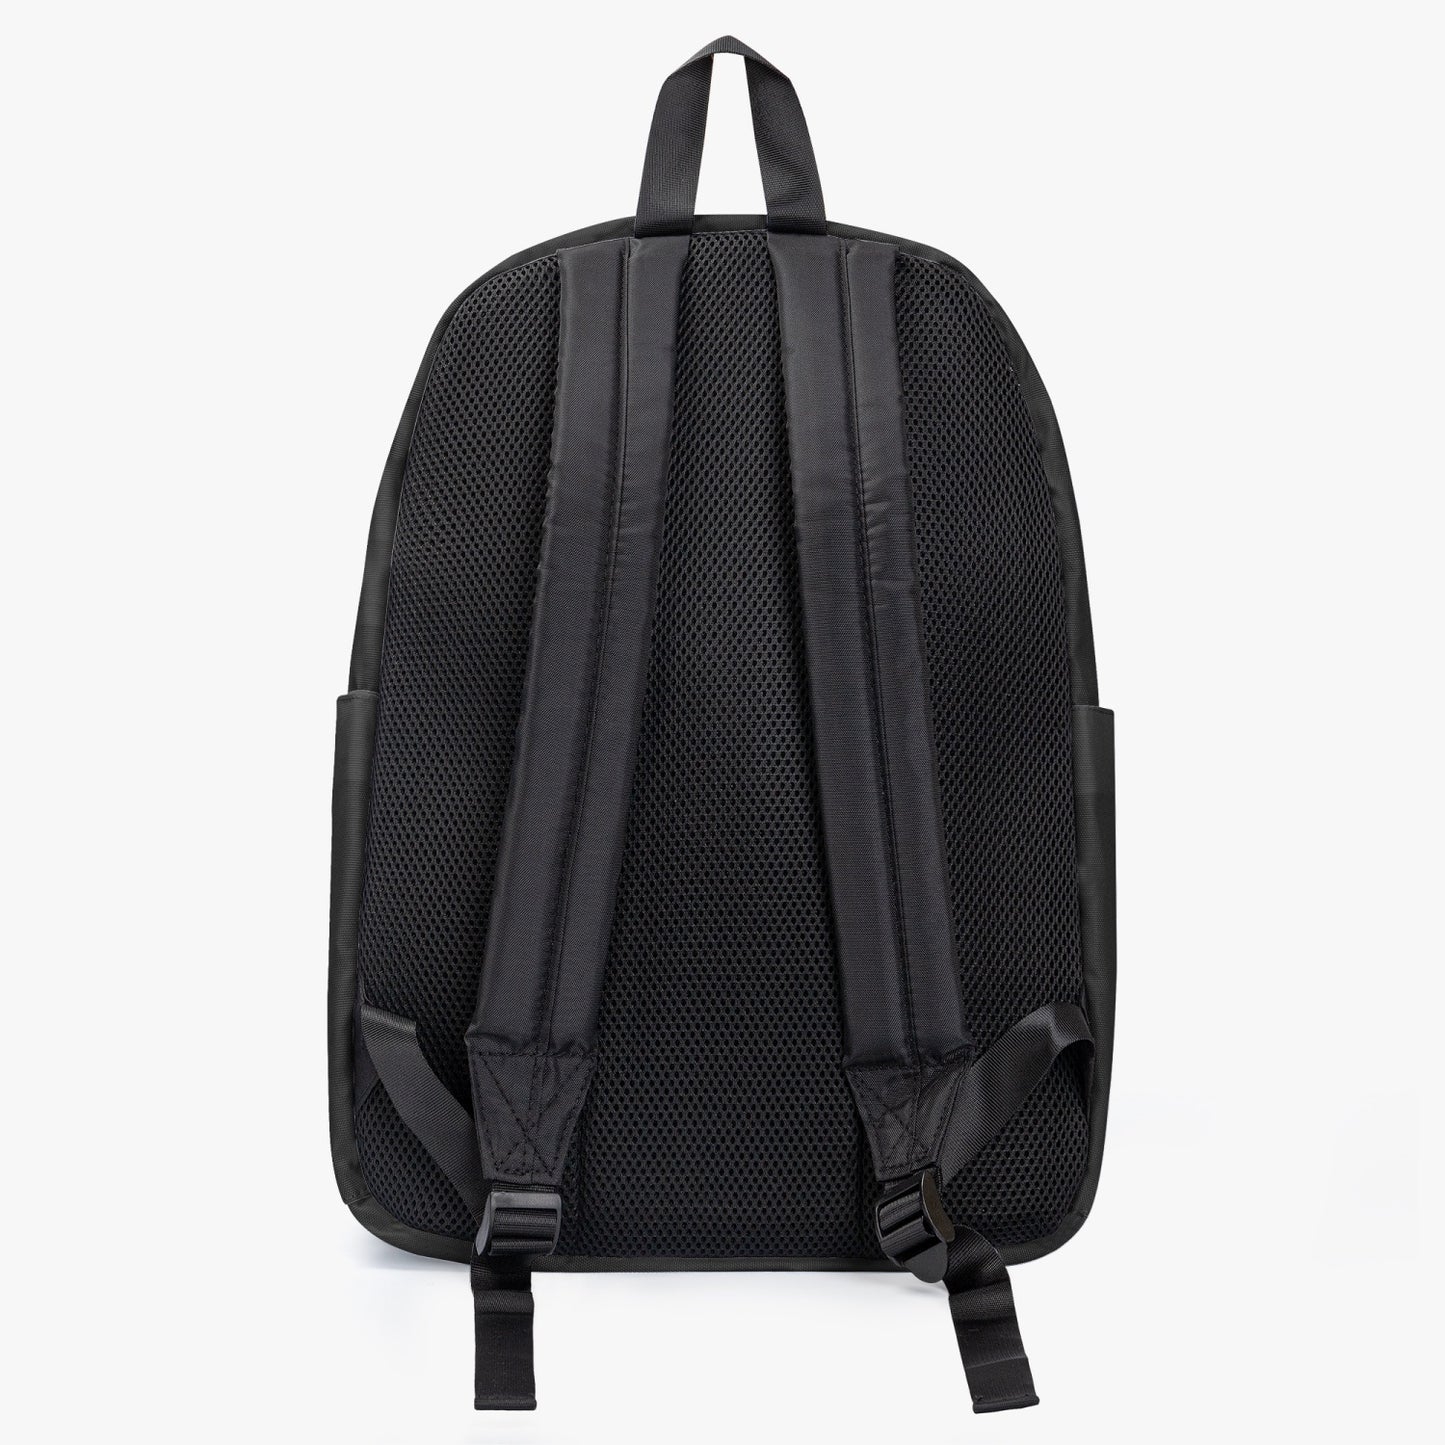 THE JUNGLIST CANVAS BACKPACK